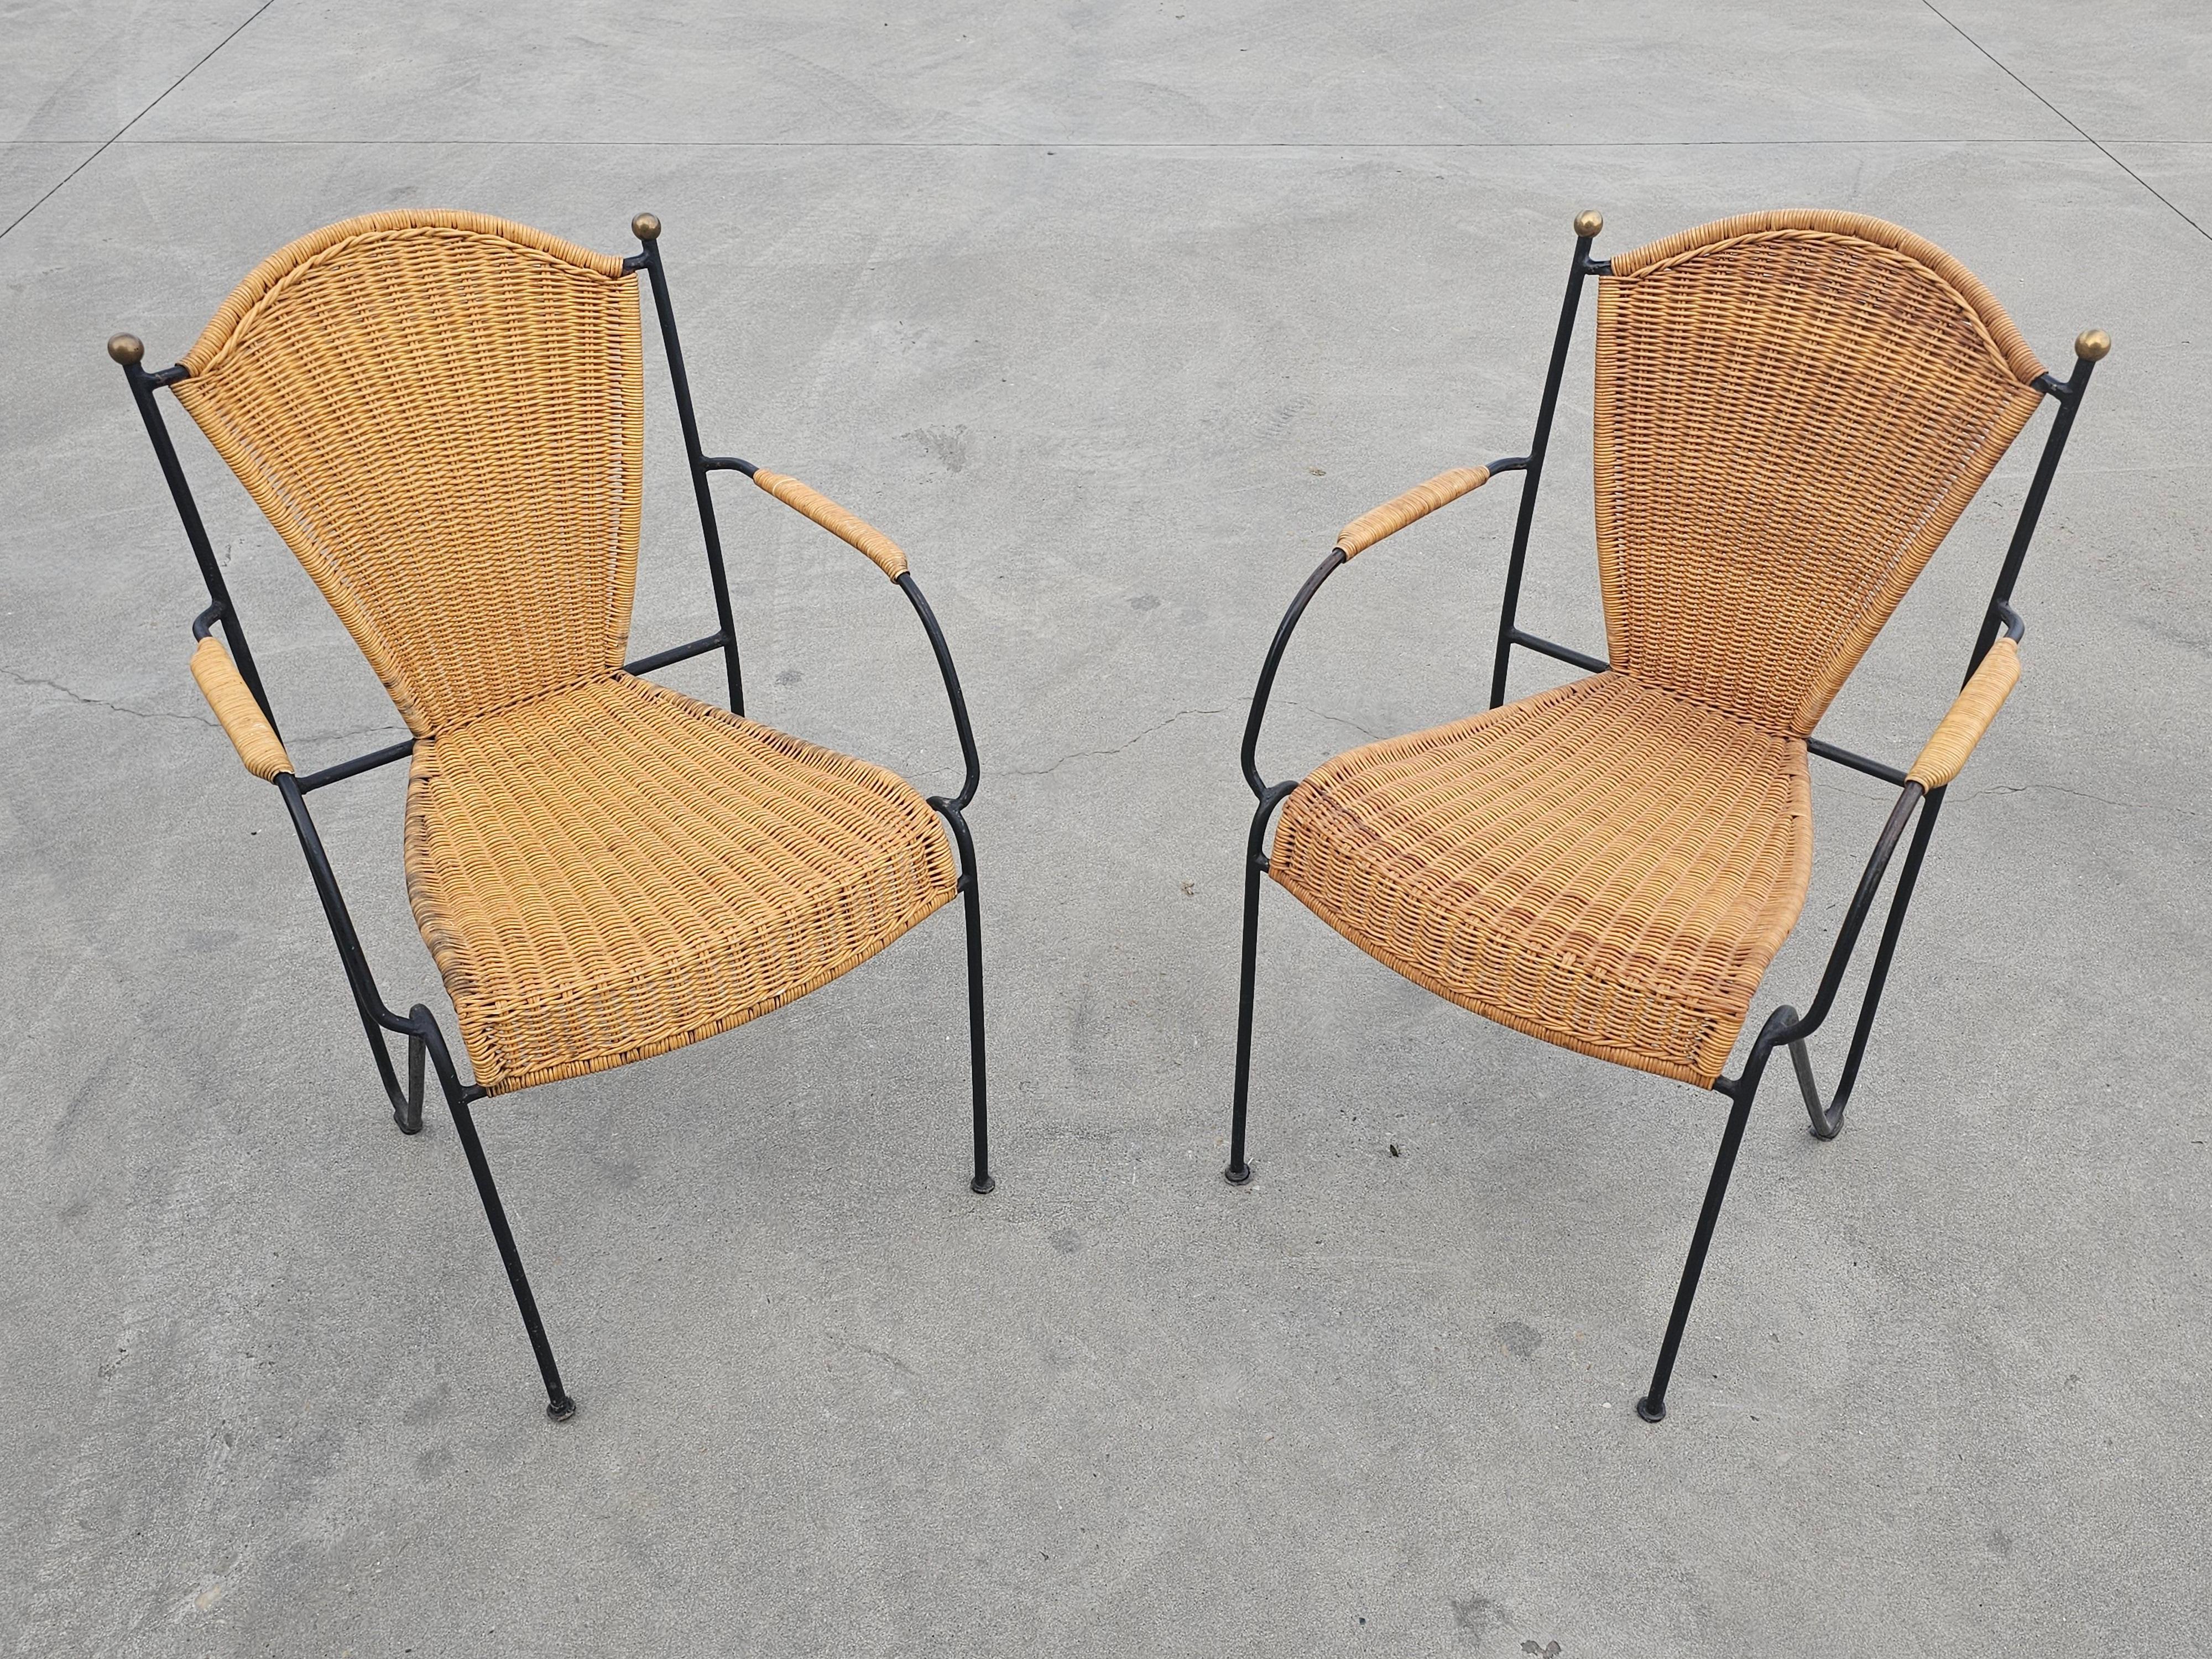 Pair of Frederic Weinberg Wicker, Wrought Iron and Brass Chairs, USA 1950s For Sale 1